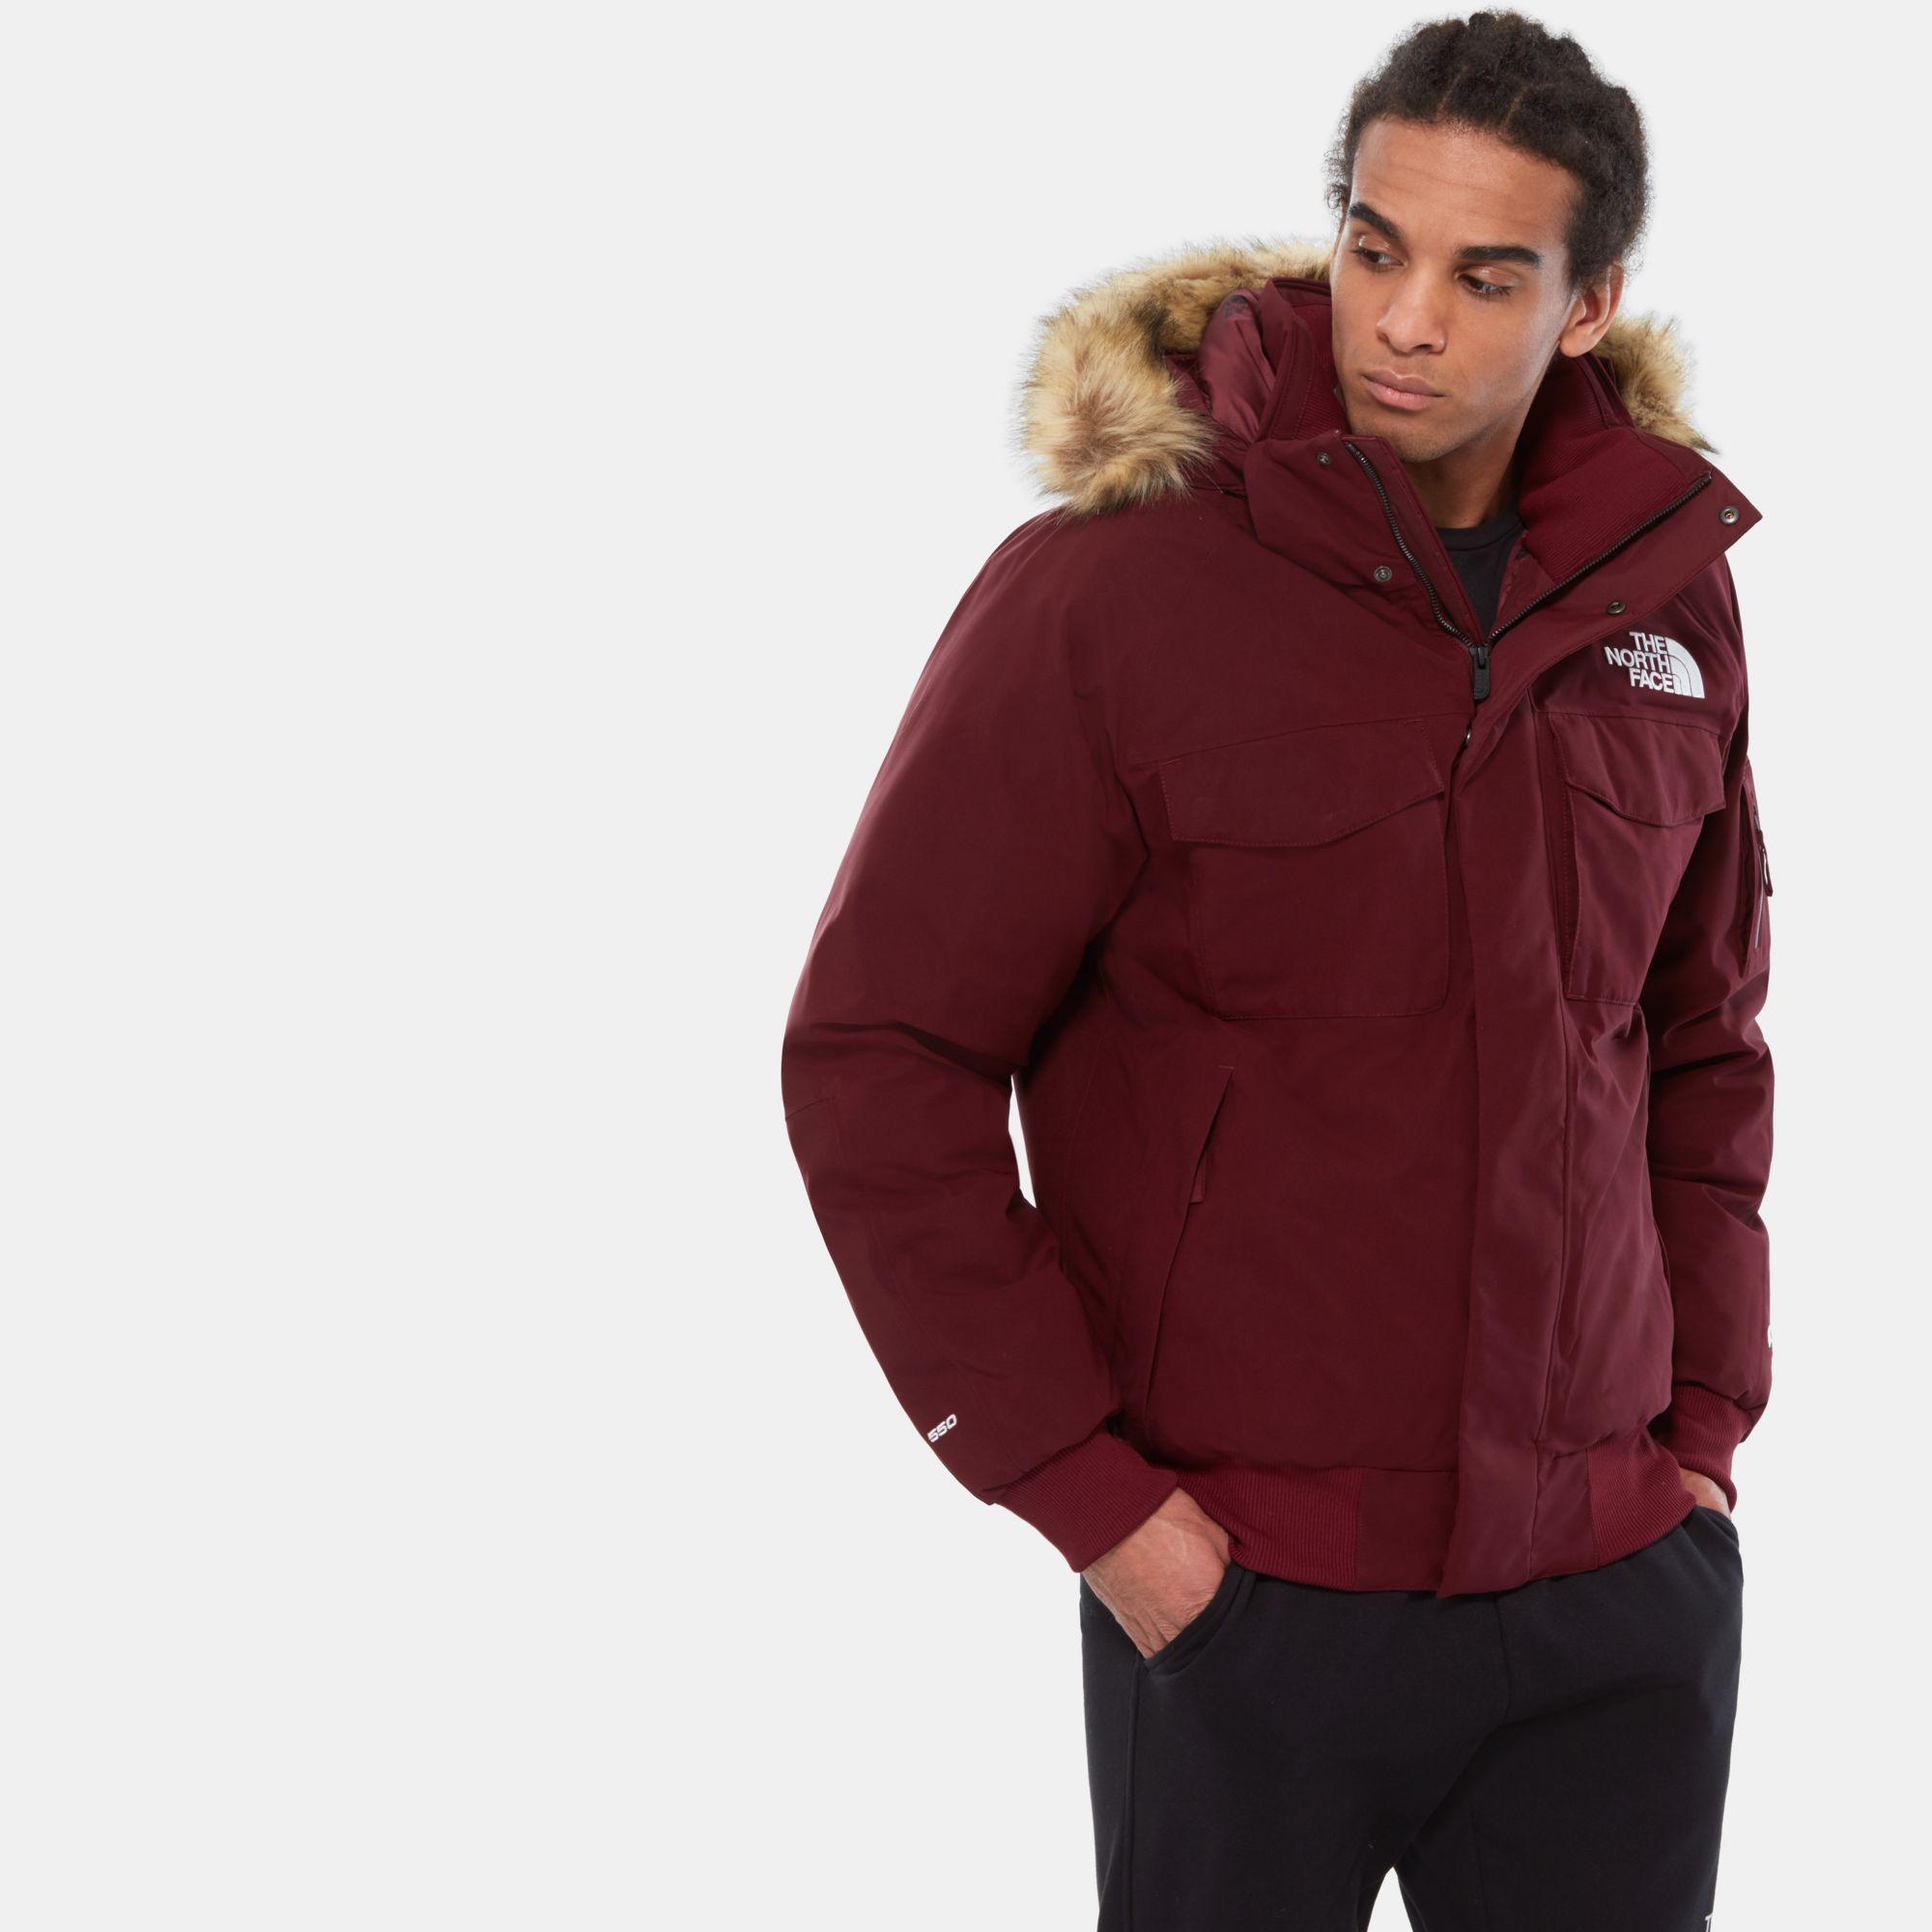 north face gotham red